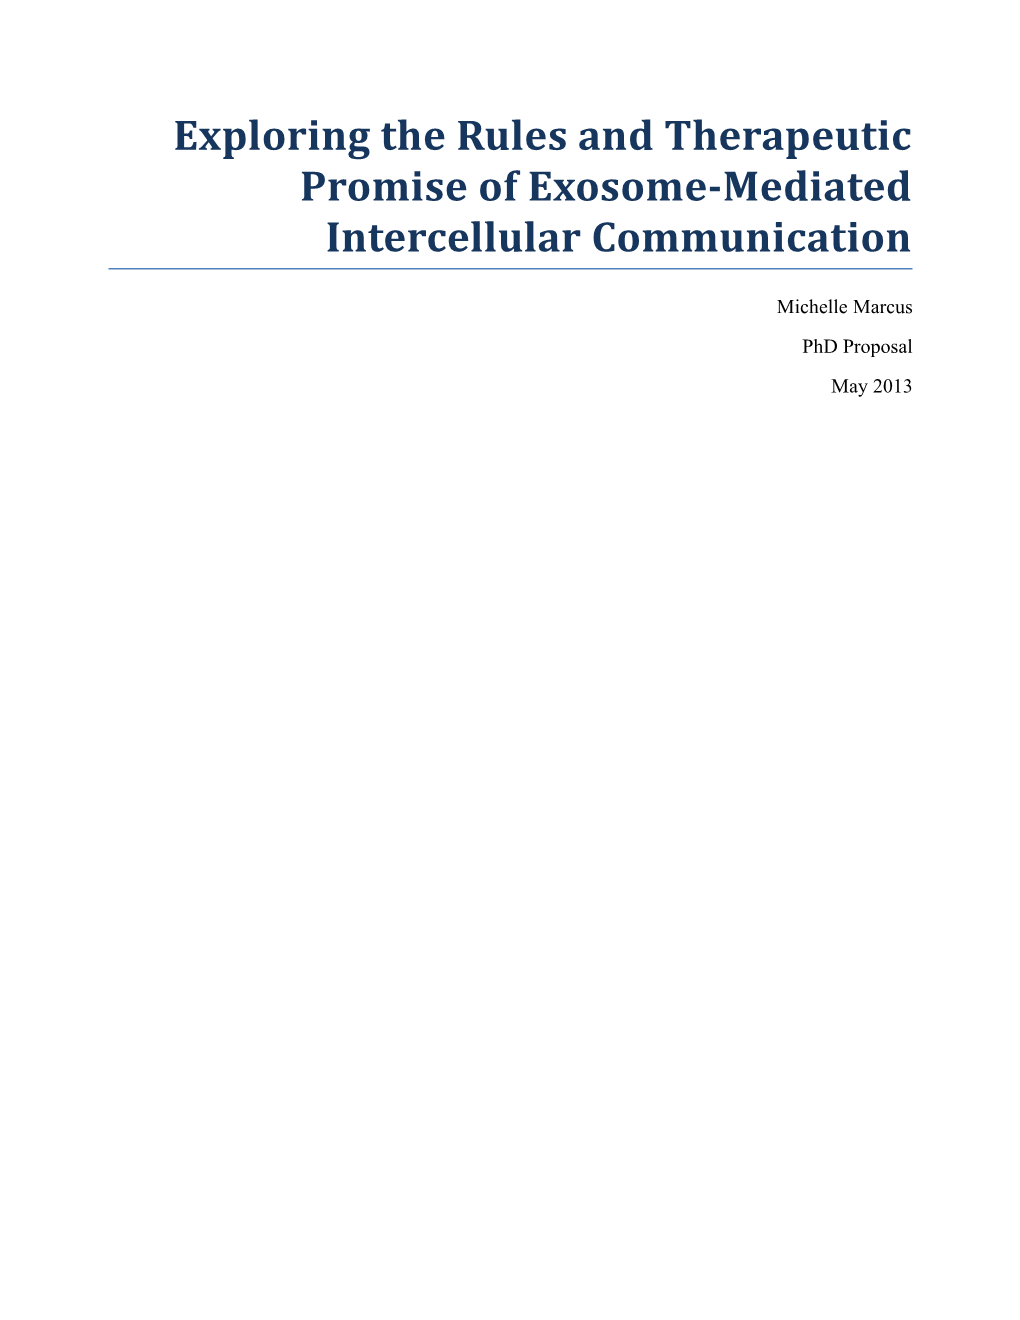 Exploring the Rules and Therapeutic Promise of Exosome-Mediated Intercellular Communication